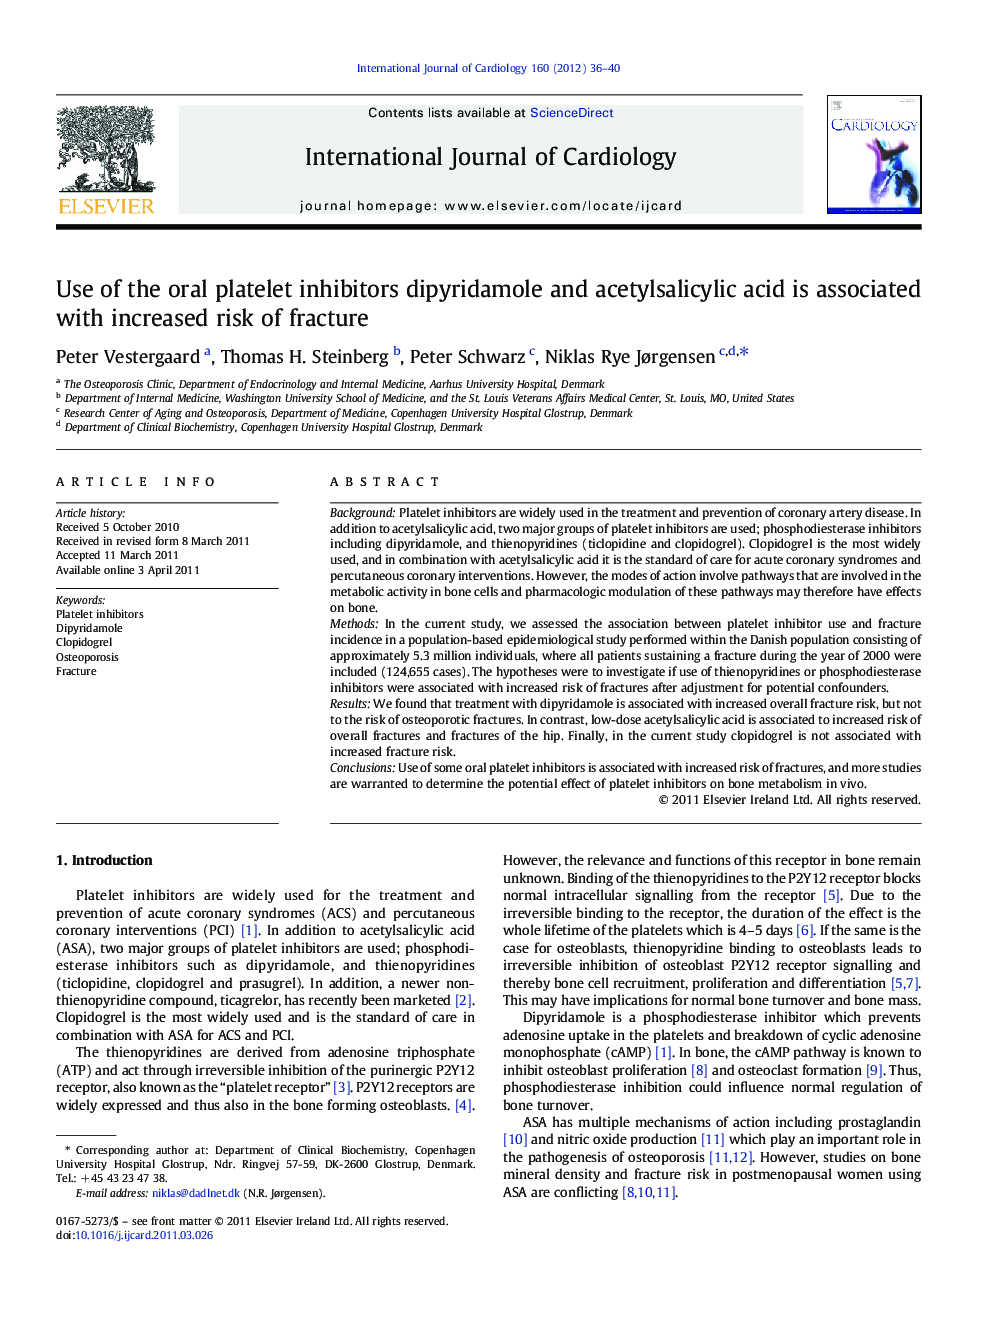 Use of the oral platelet inhibitors dipyridamole and acetylsalicylic acid is associated with increased risk of fracture